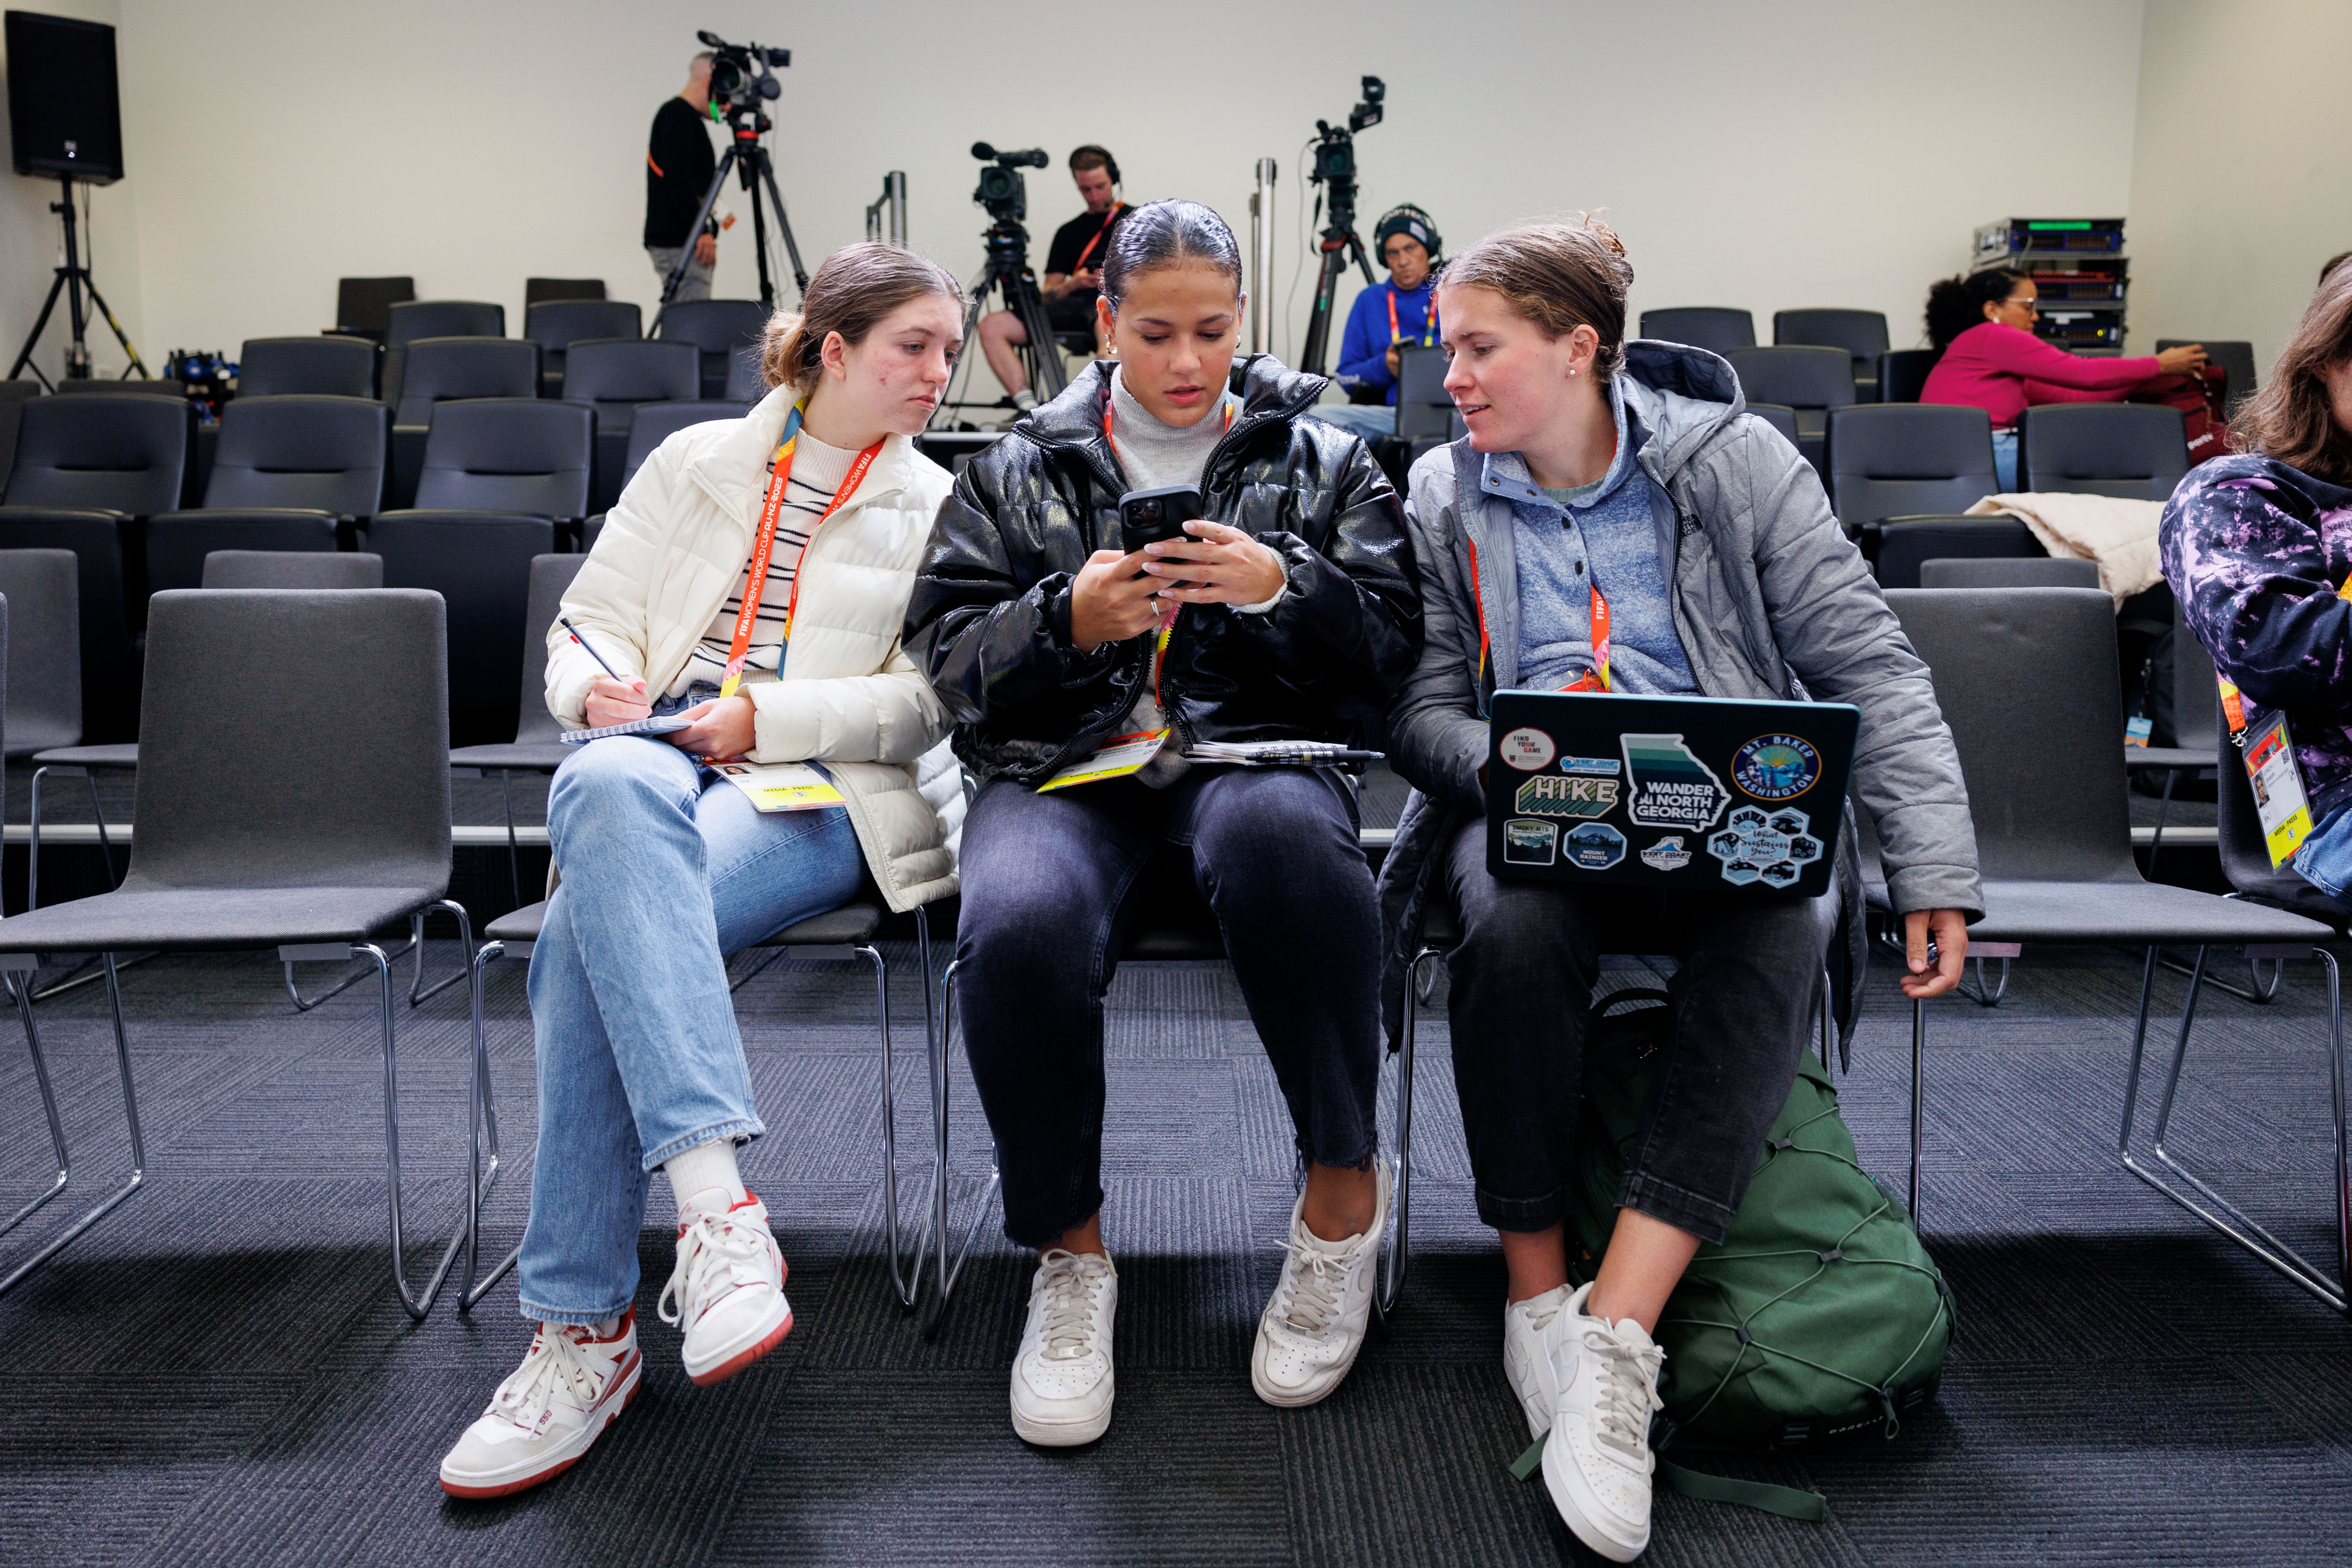 Three students wait for the start of the Jamaica news conference at the Melbourne Rectangular Stadium in Melbourne, Australia. 